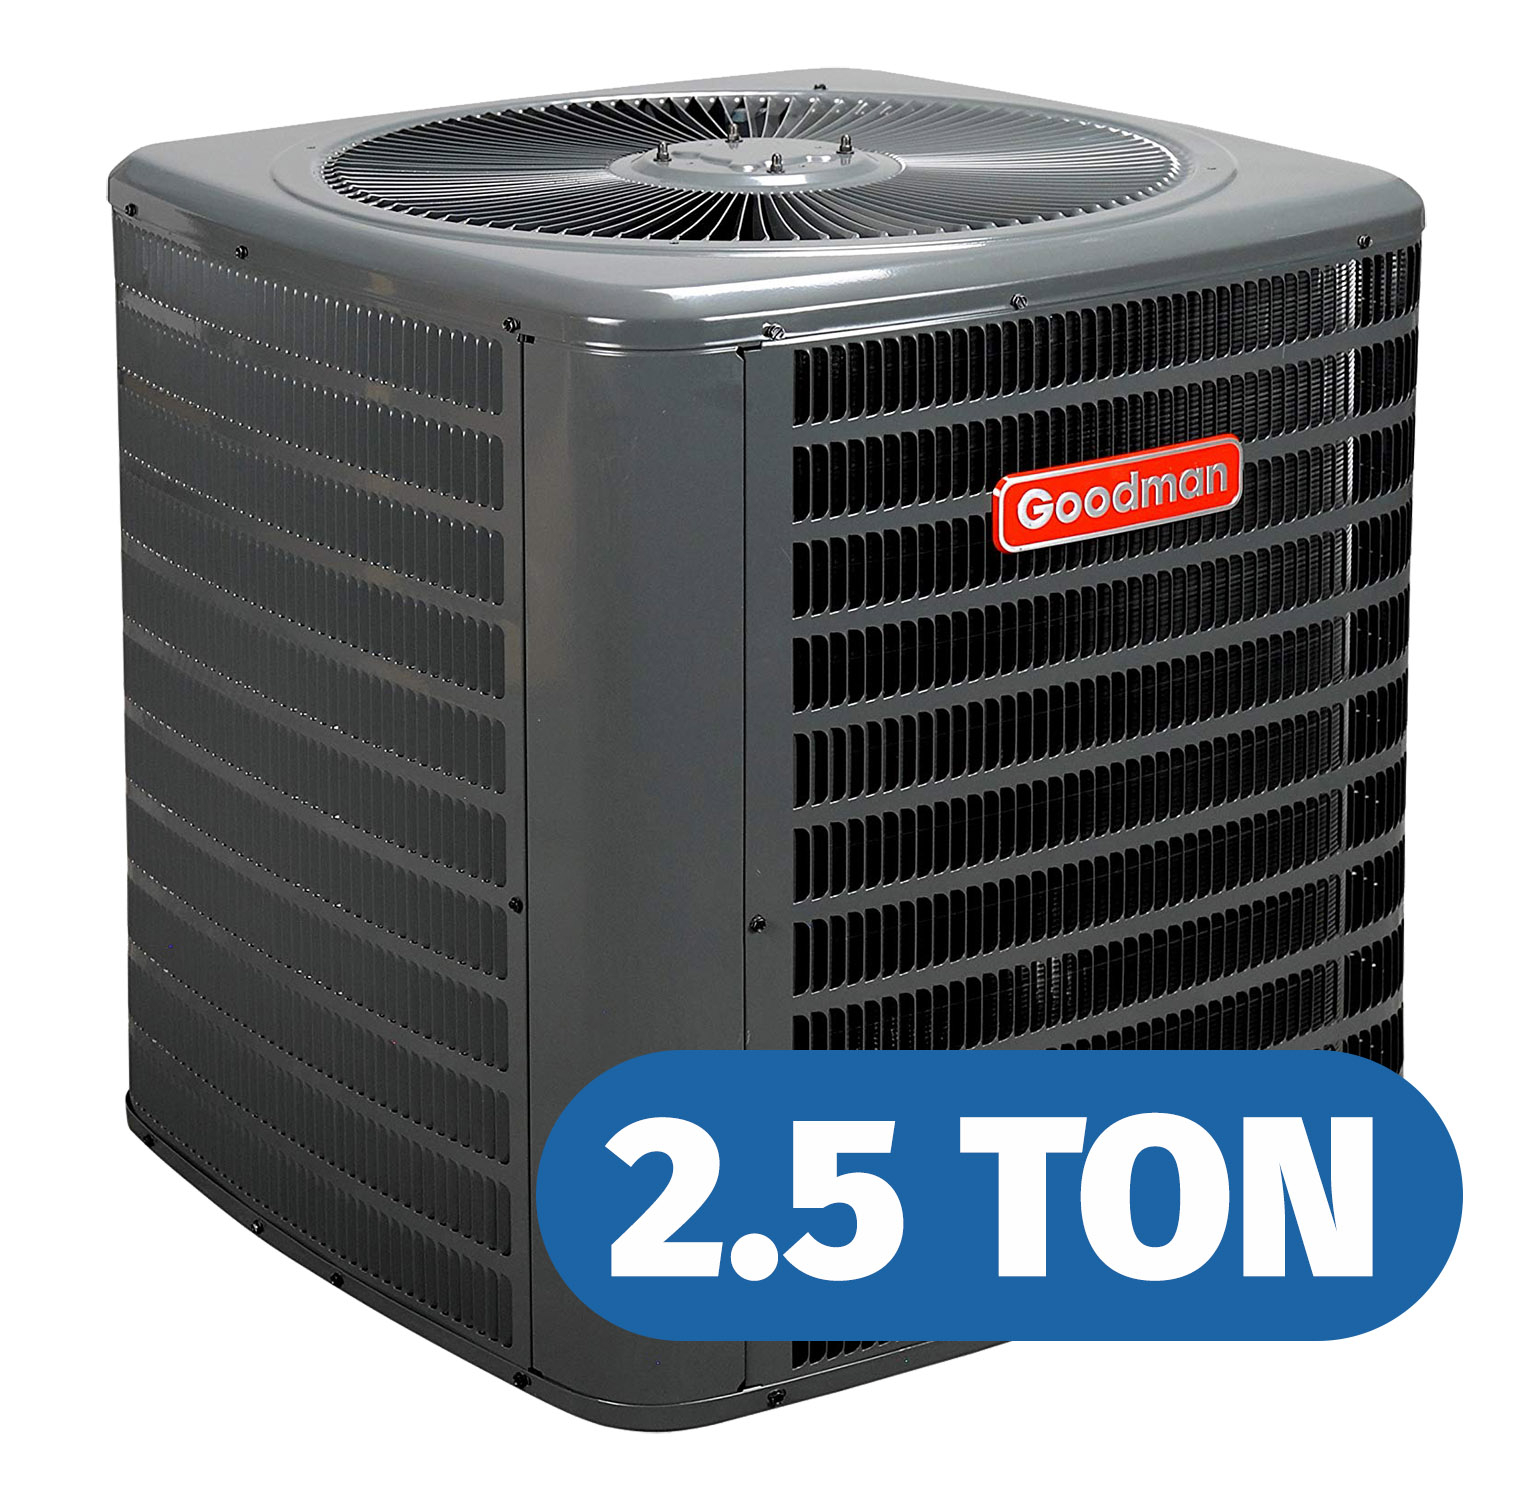 2.5 Ton Air Conditioners